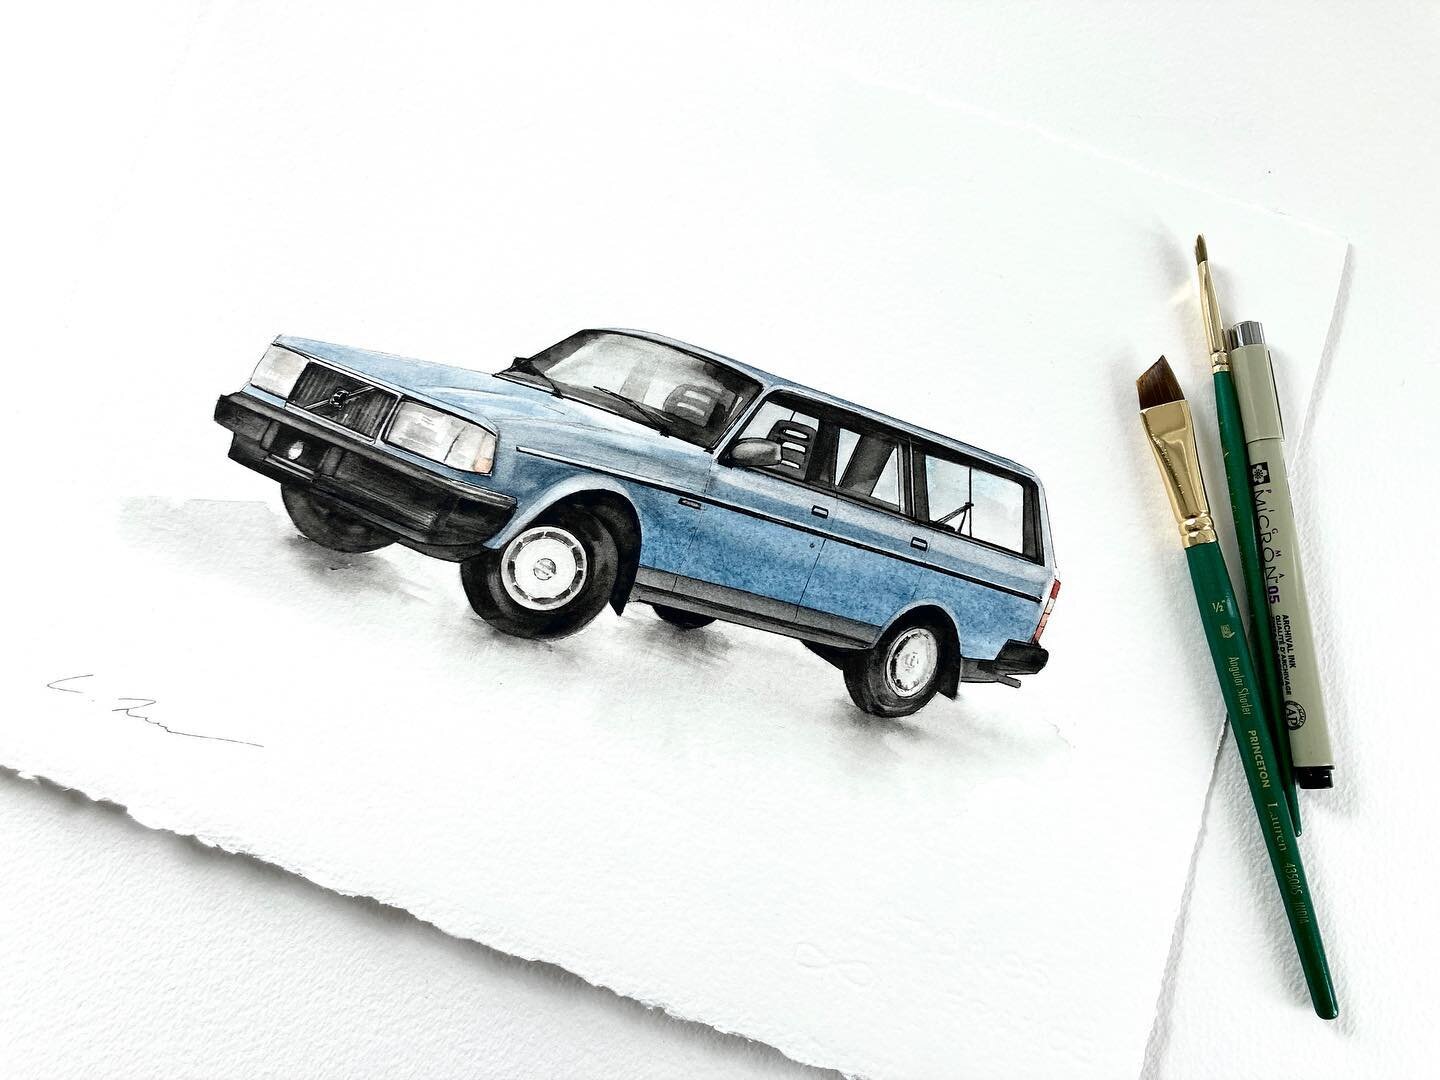 Been waiting a while to share this one but we wanted to keep it a surprise 🎉 I was commissioned to paint a Volvo Station wagon for someone&rsquo;s birthday - their favorite car from their youth! So fun! I&rsquo;m including some process pics from ske